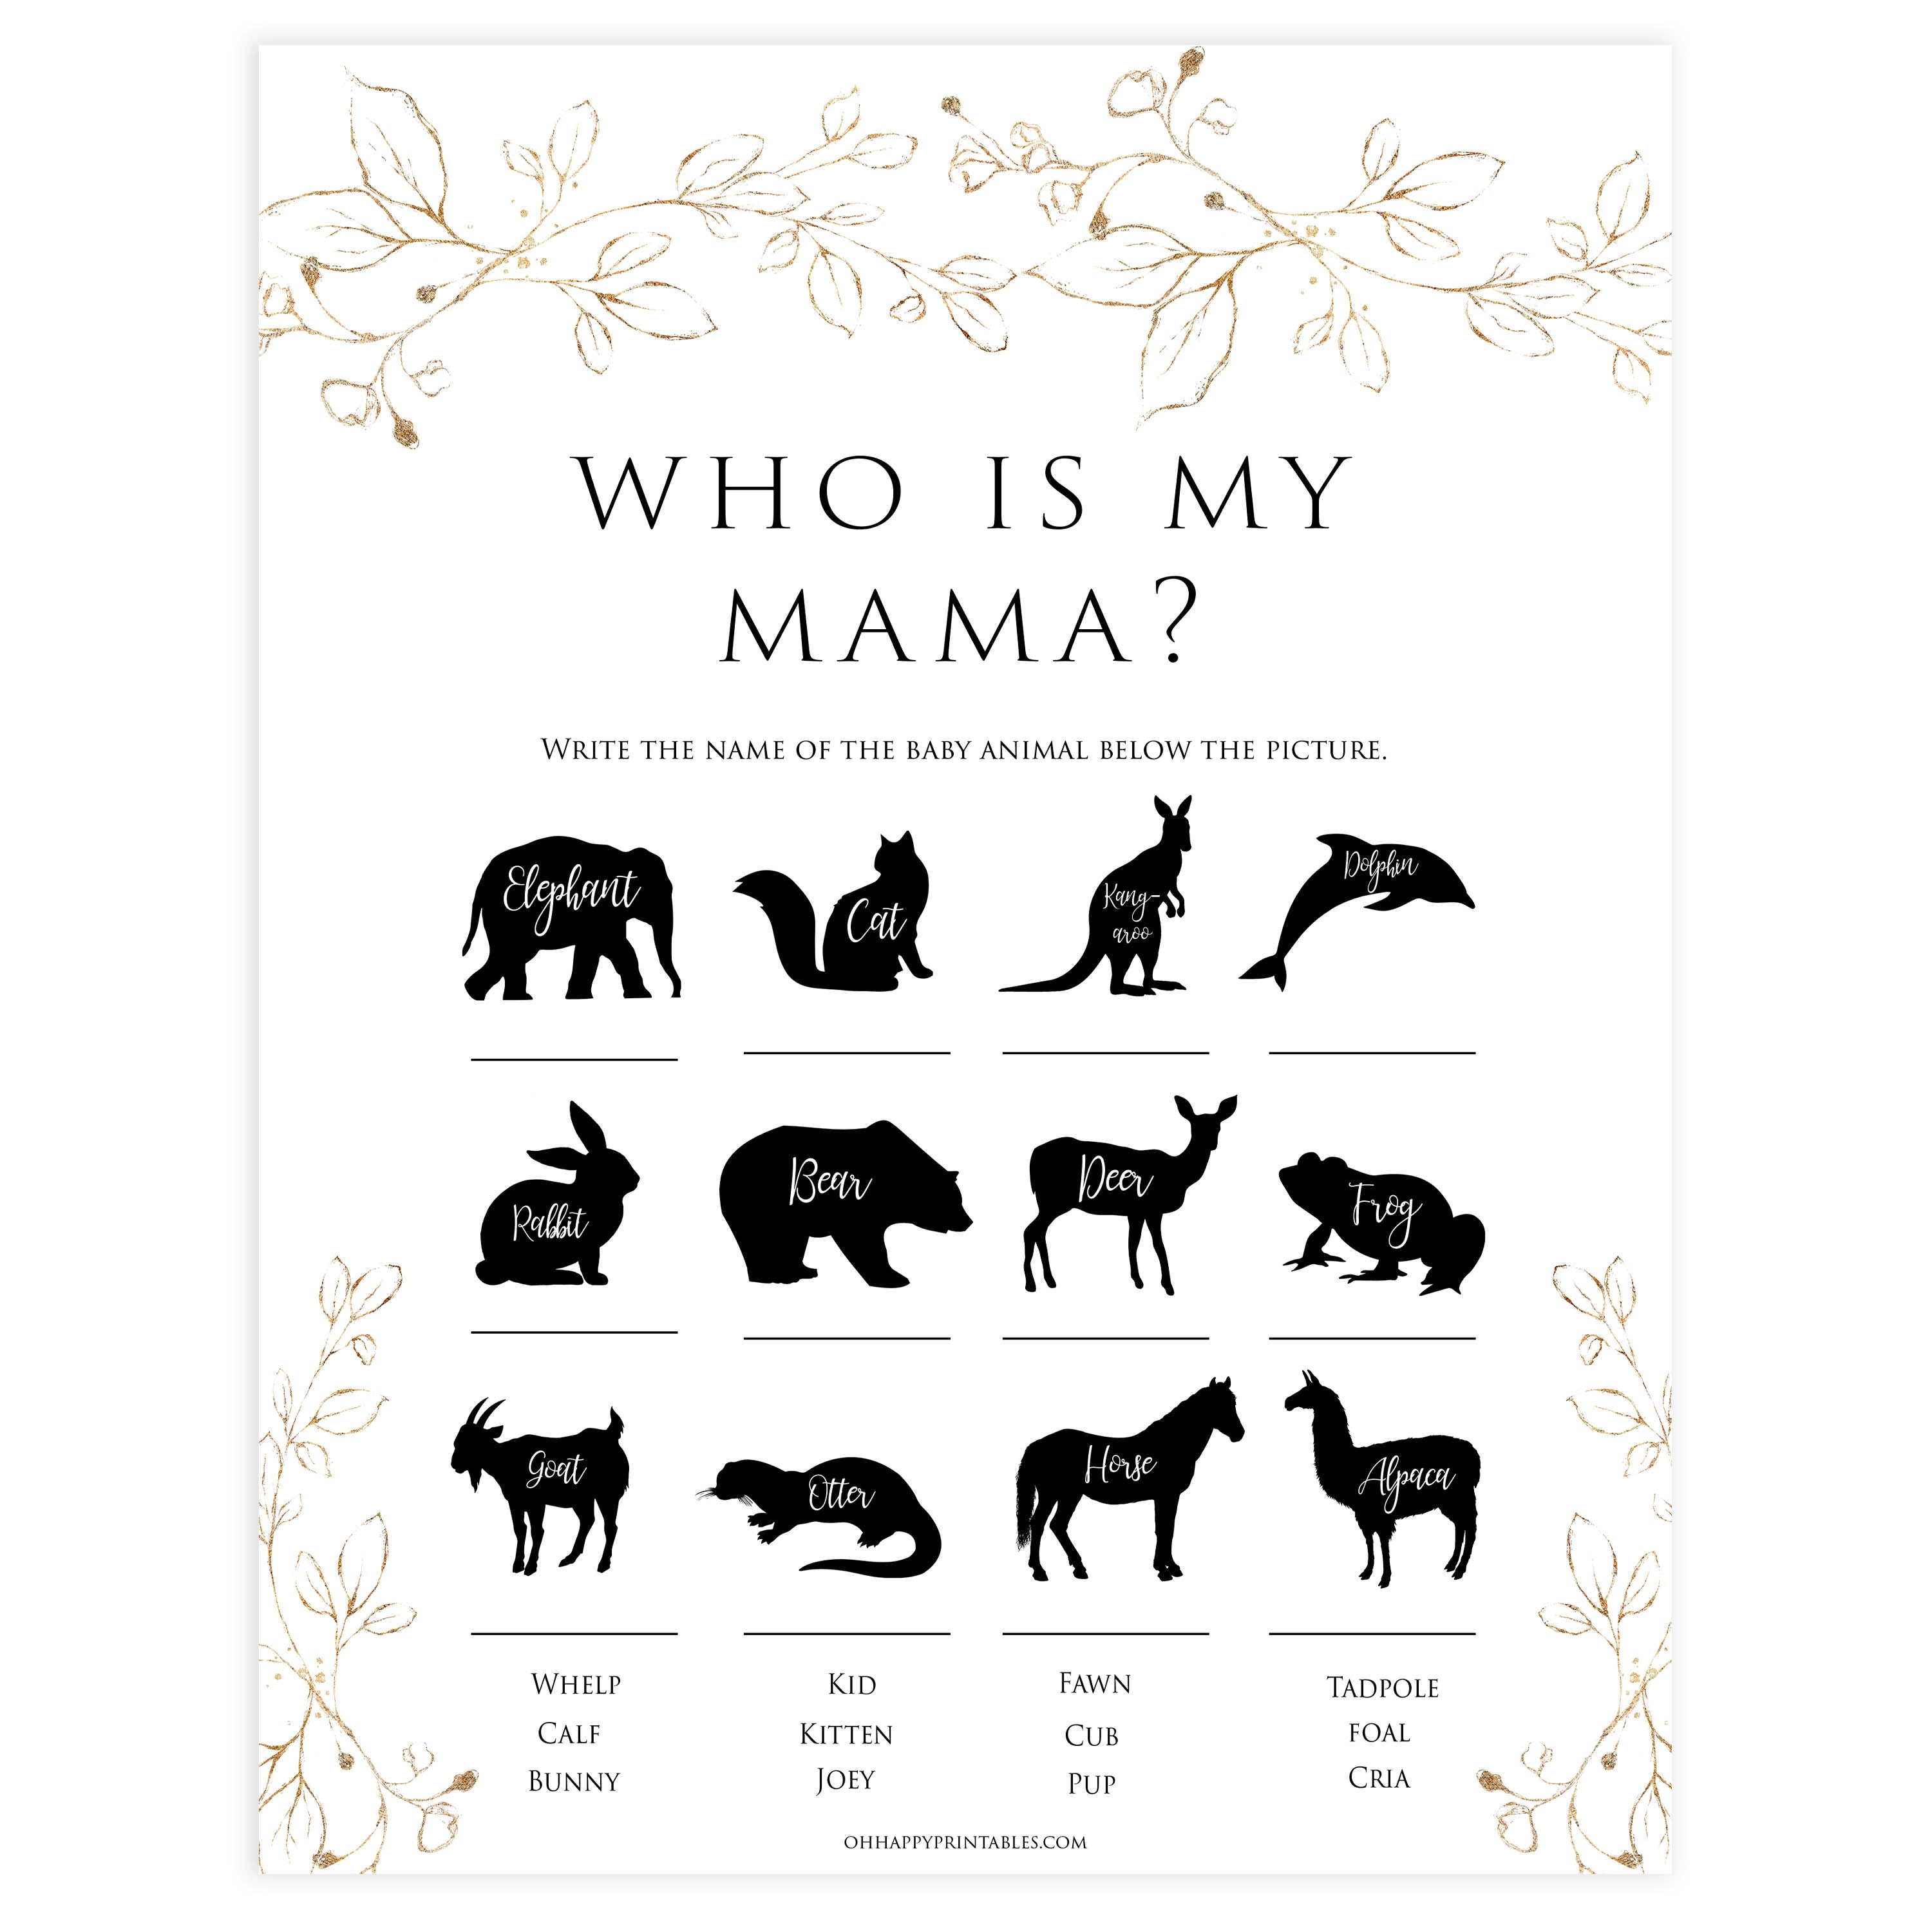 who is my mama baby game, Printable baby shower games, gold leaf baby games, baby shower games, fun baby shower ideas, top baby shower ideas, gold leaf baby shower, baby shower games, fun gold leaf baby shower ideas